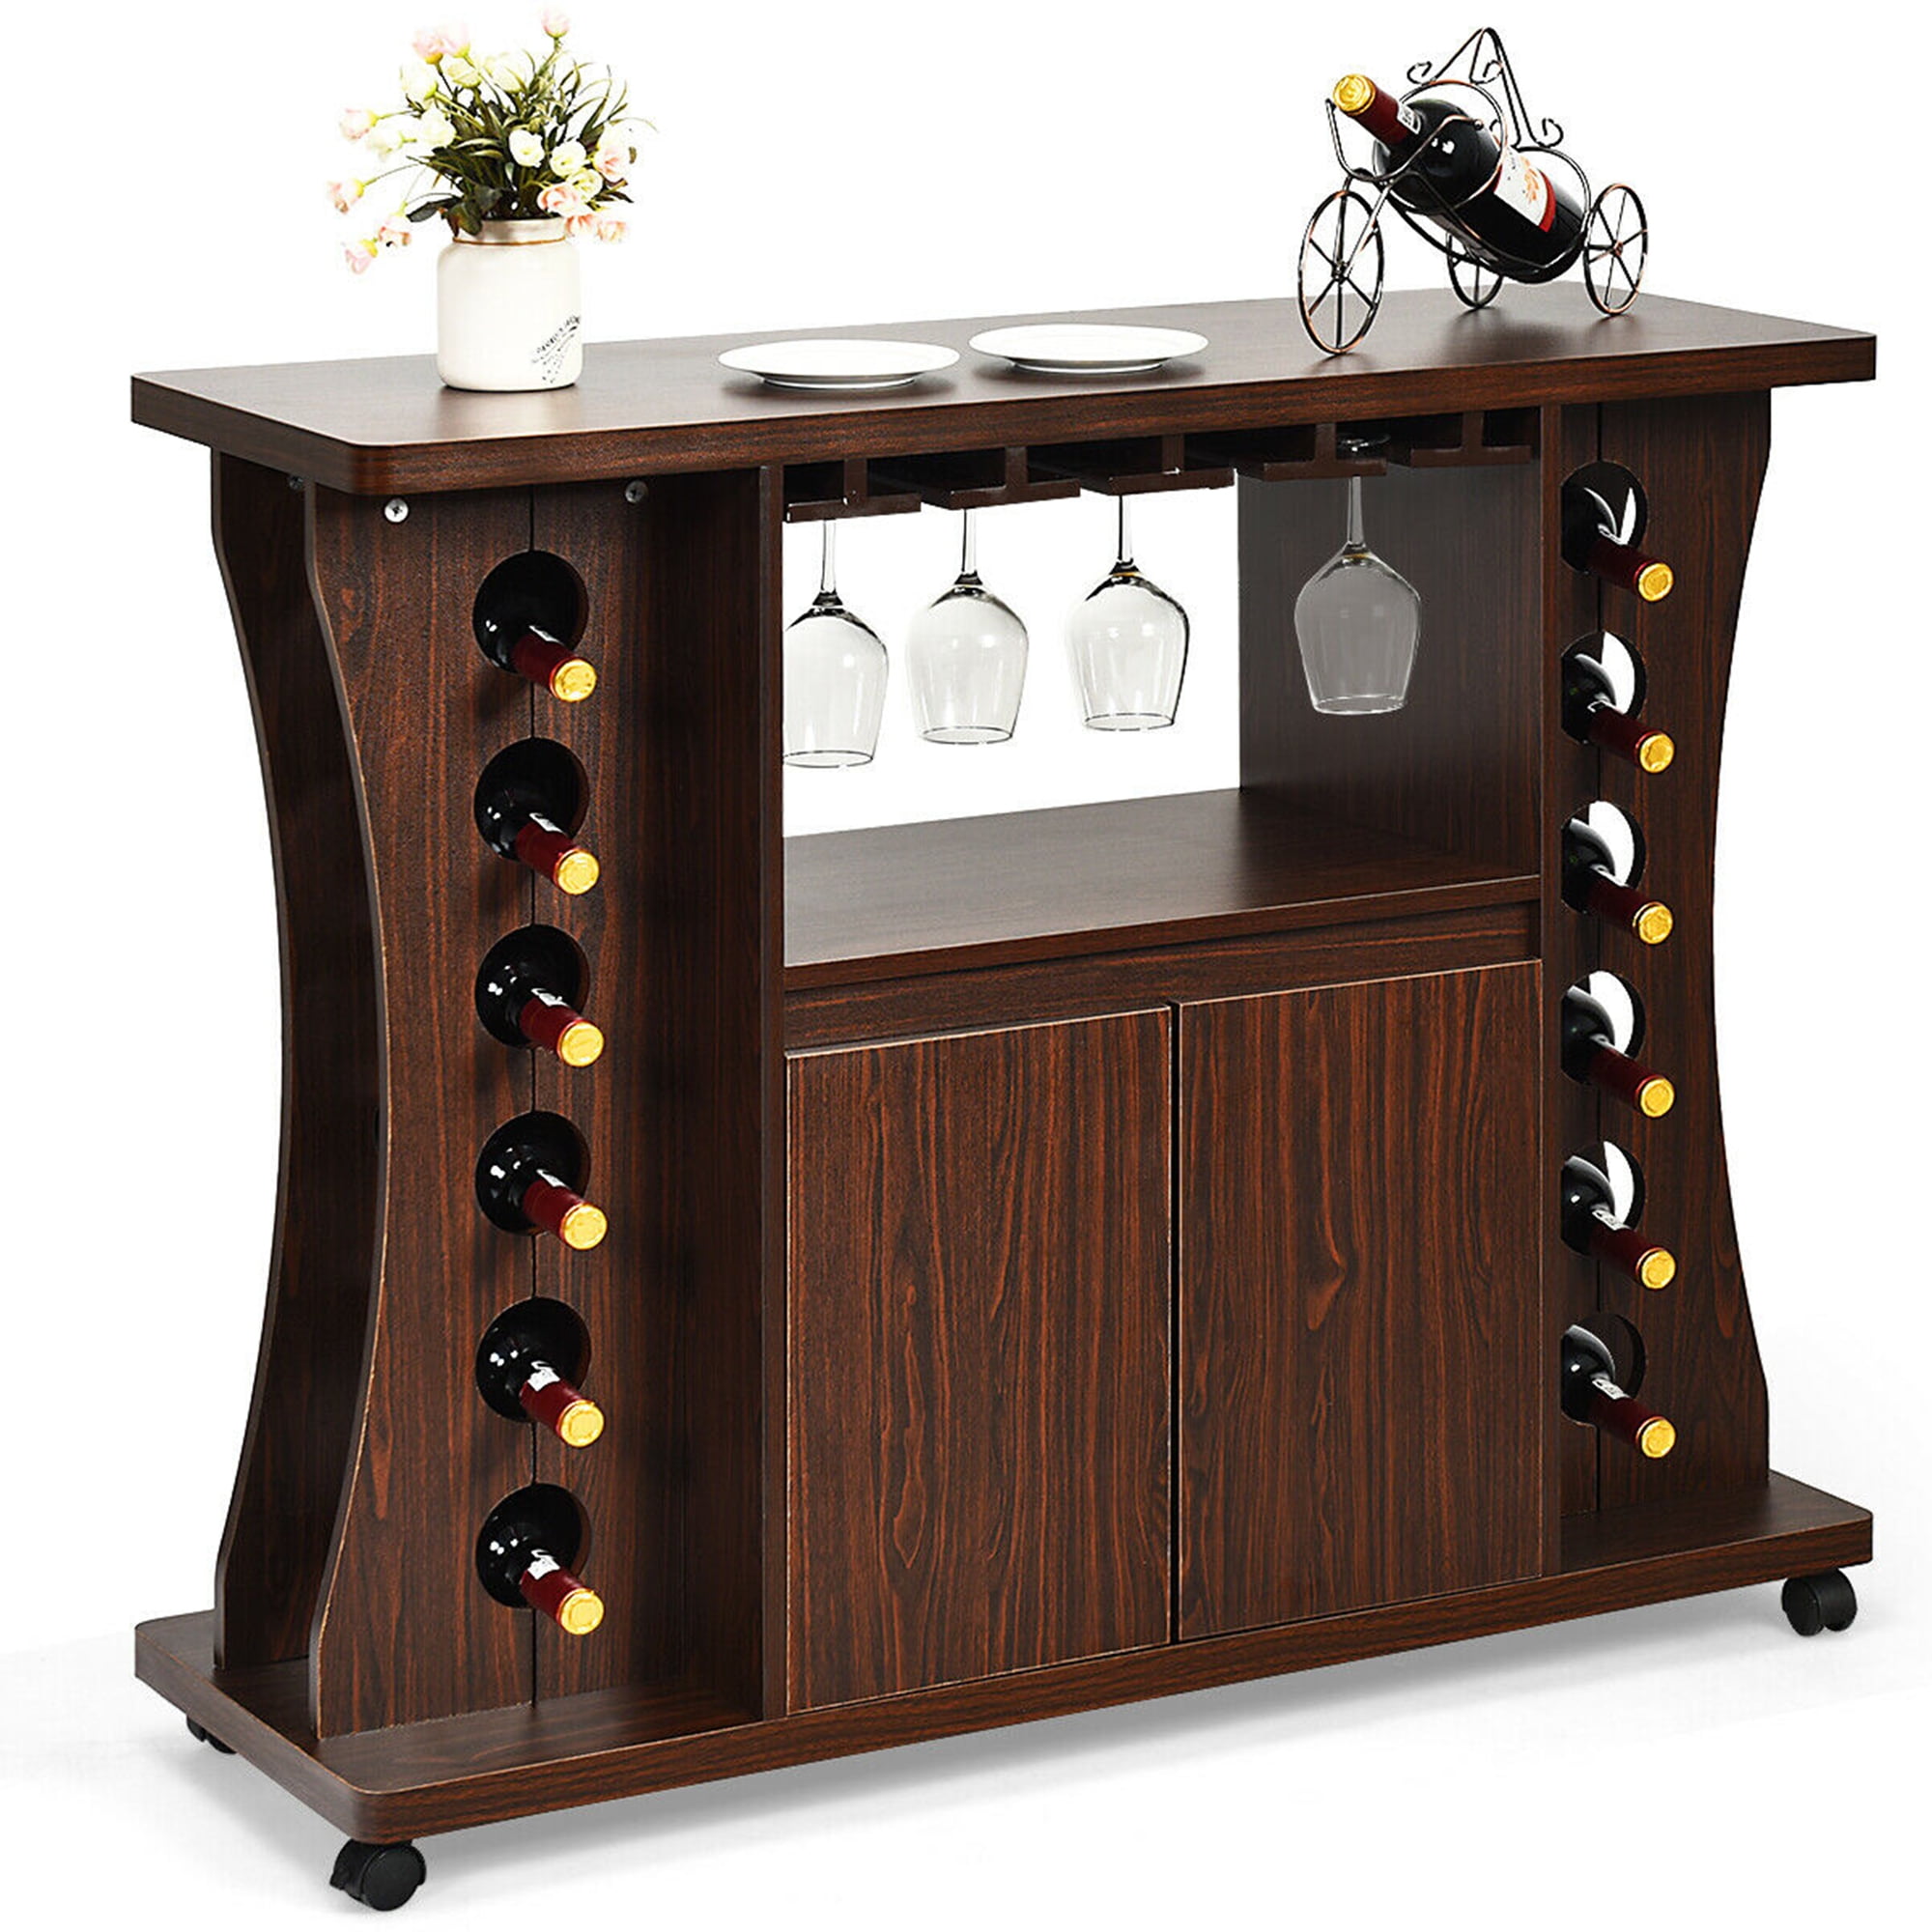 which can accommodate Large Capacity Bottles 12 bar Sideboard with Wine Rack Restaurant for Living Storage,White 